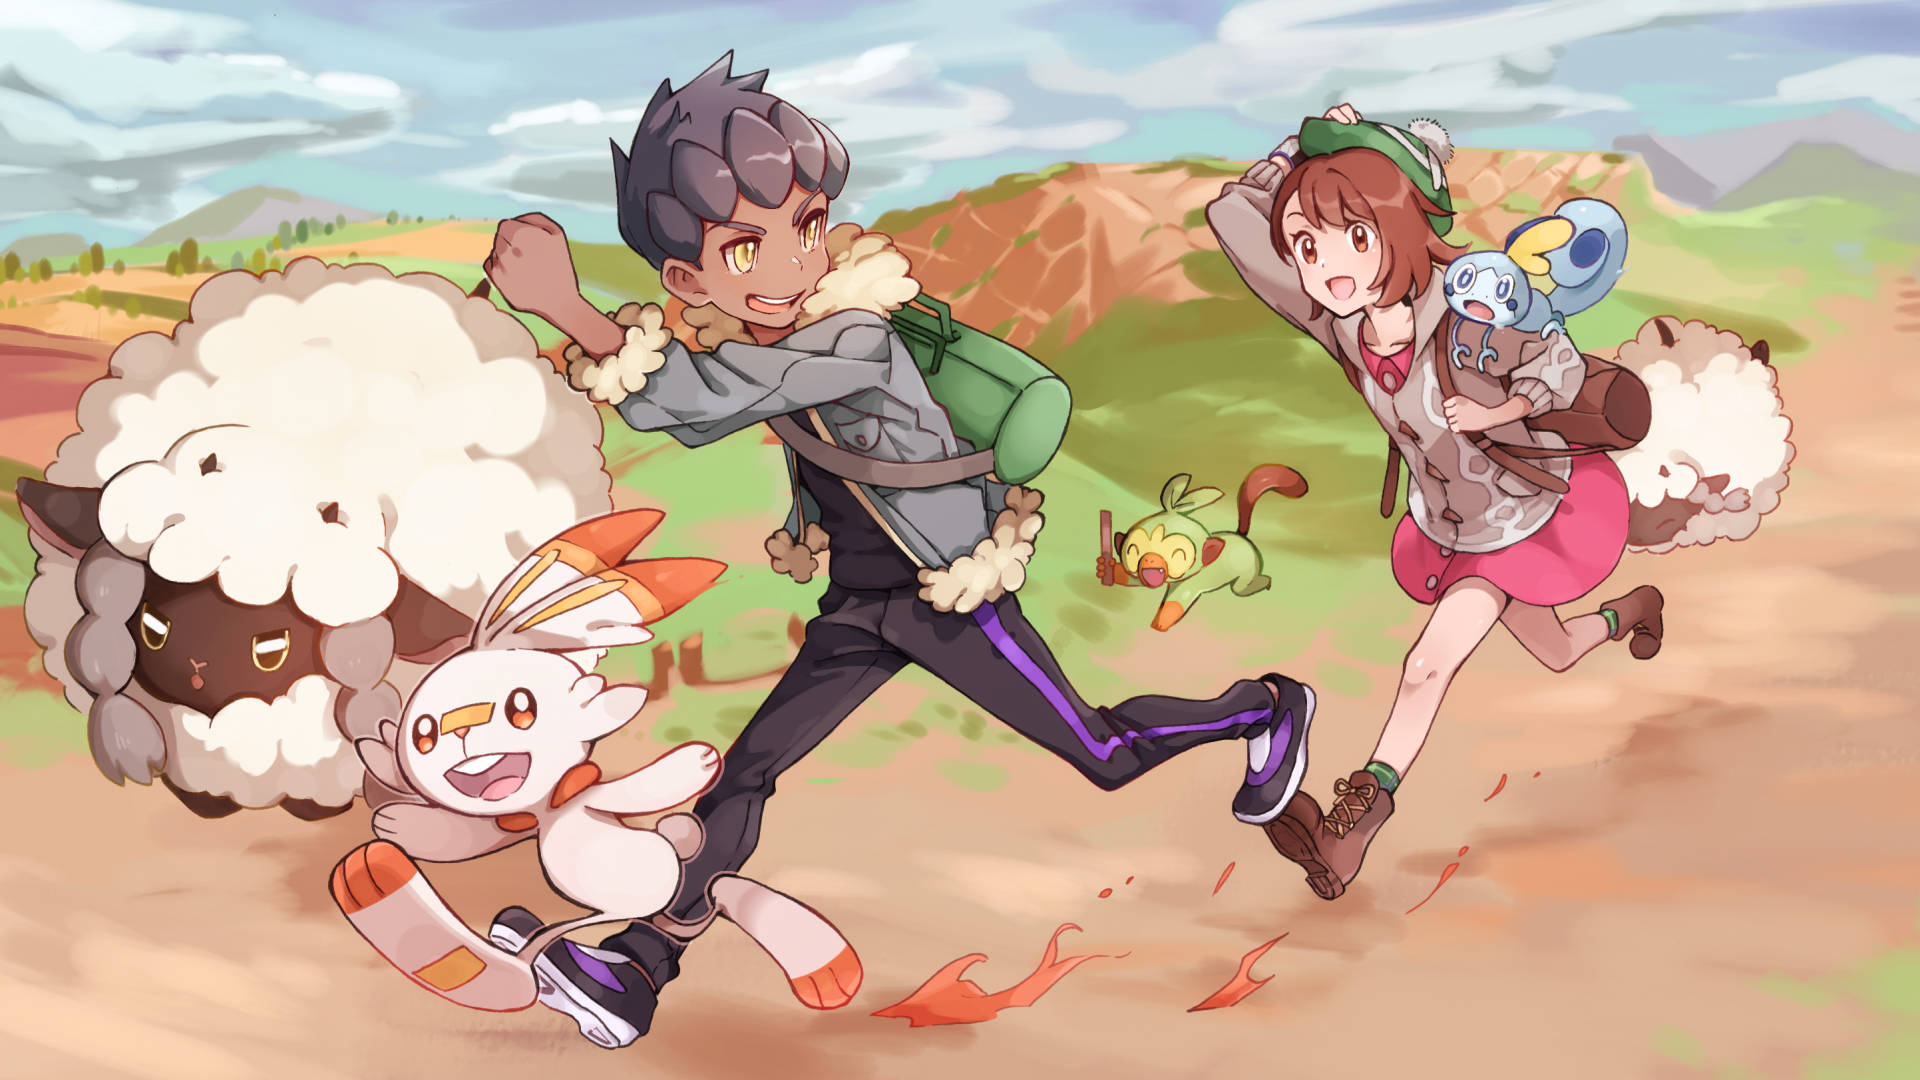 "Explore Galar And Catch 'Em All With Pokemon Sword And Shield" Wallpaper